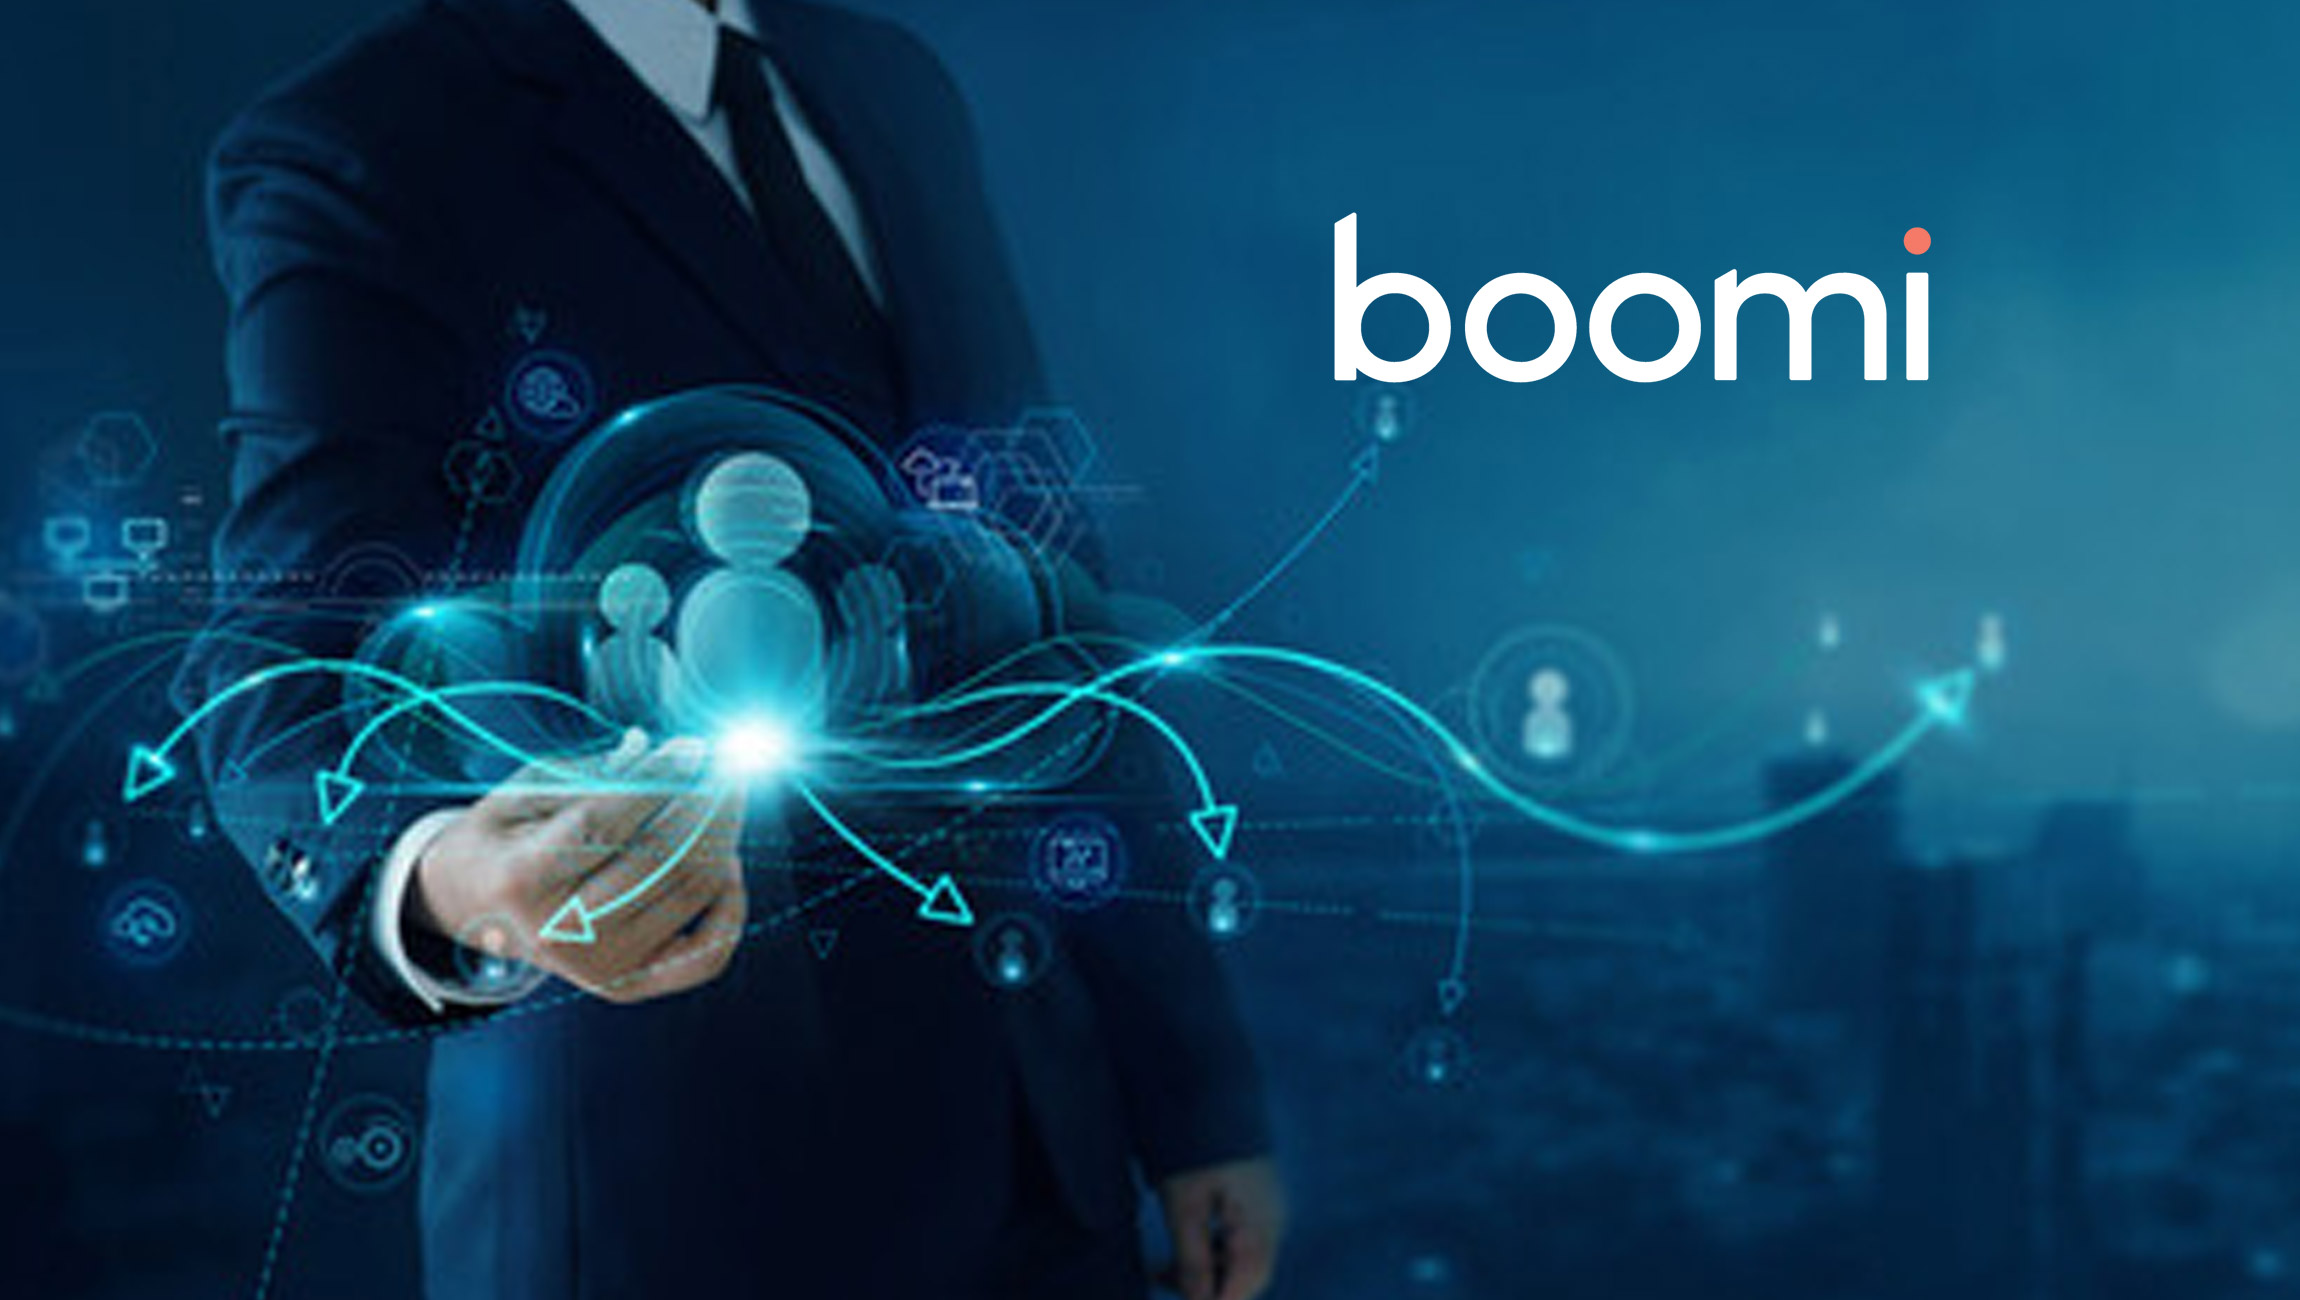 Boomi Appoints Former Citrix Executive as President and CFO, and Former SAP Executive as CMO